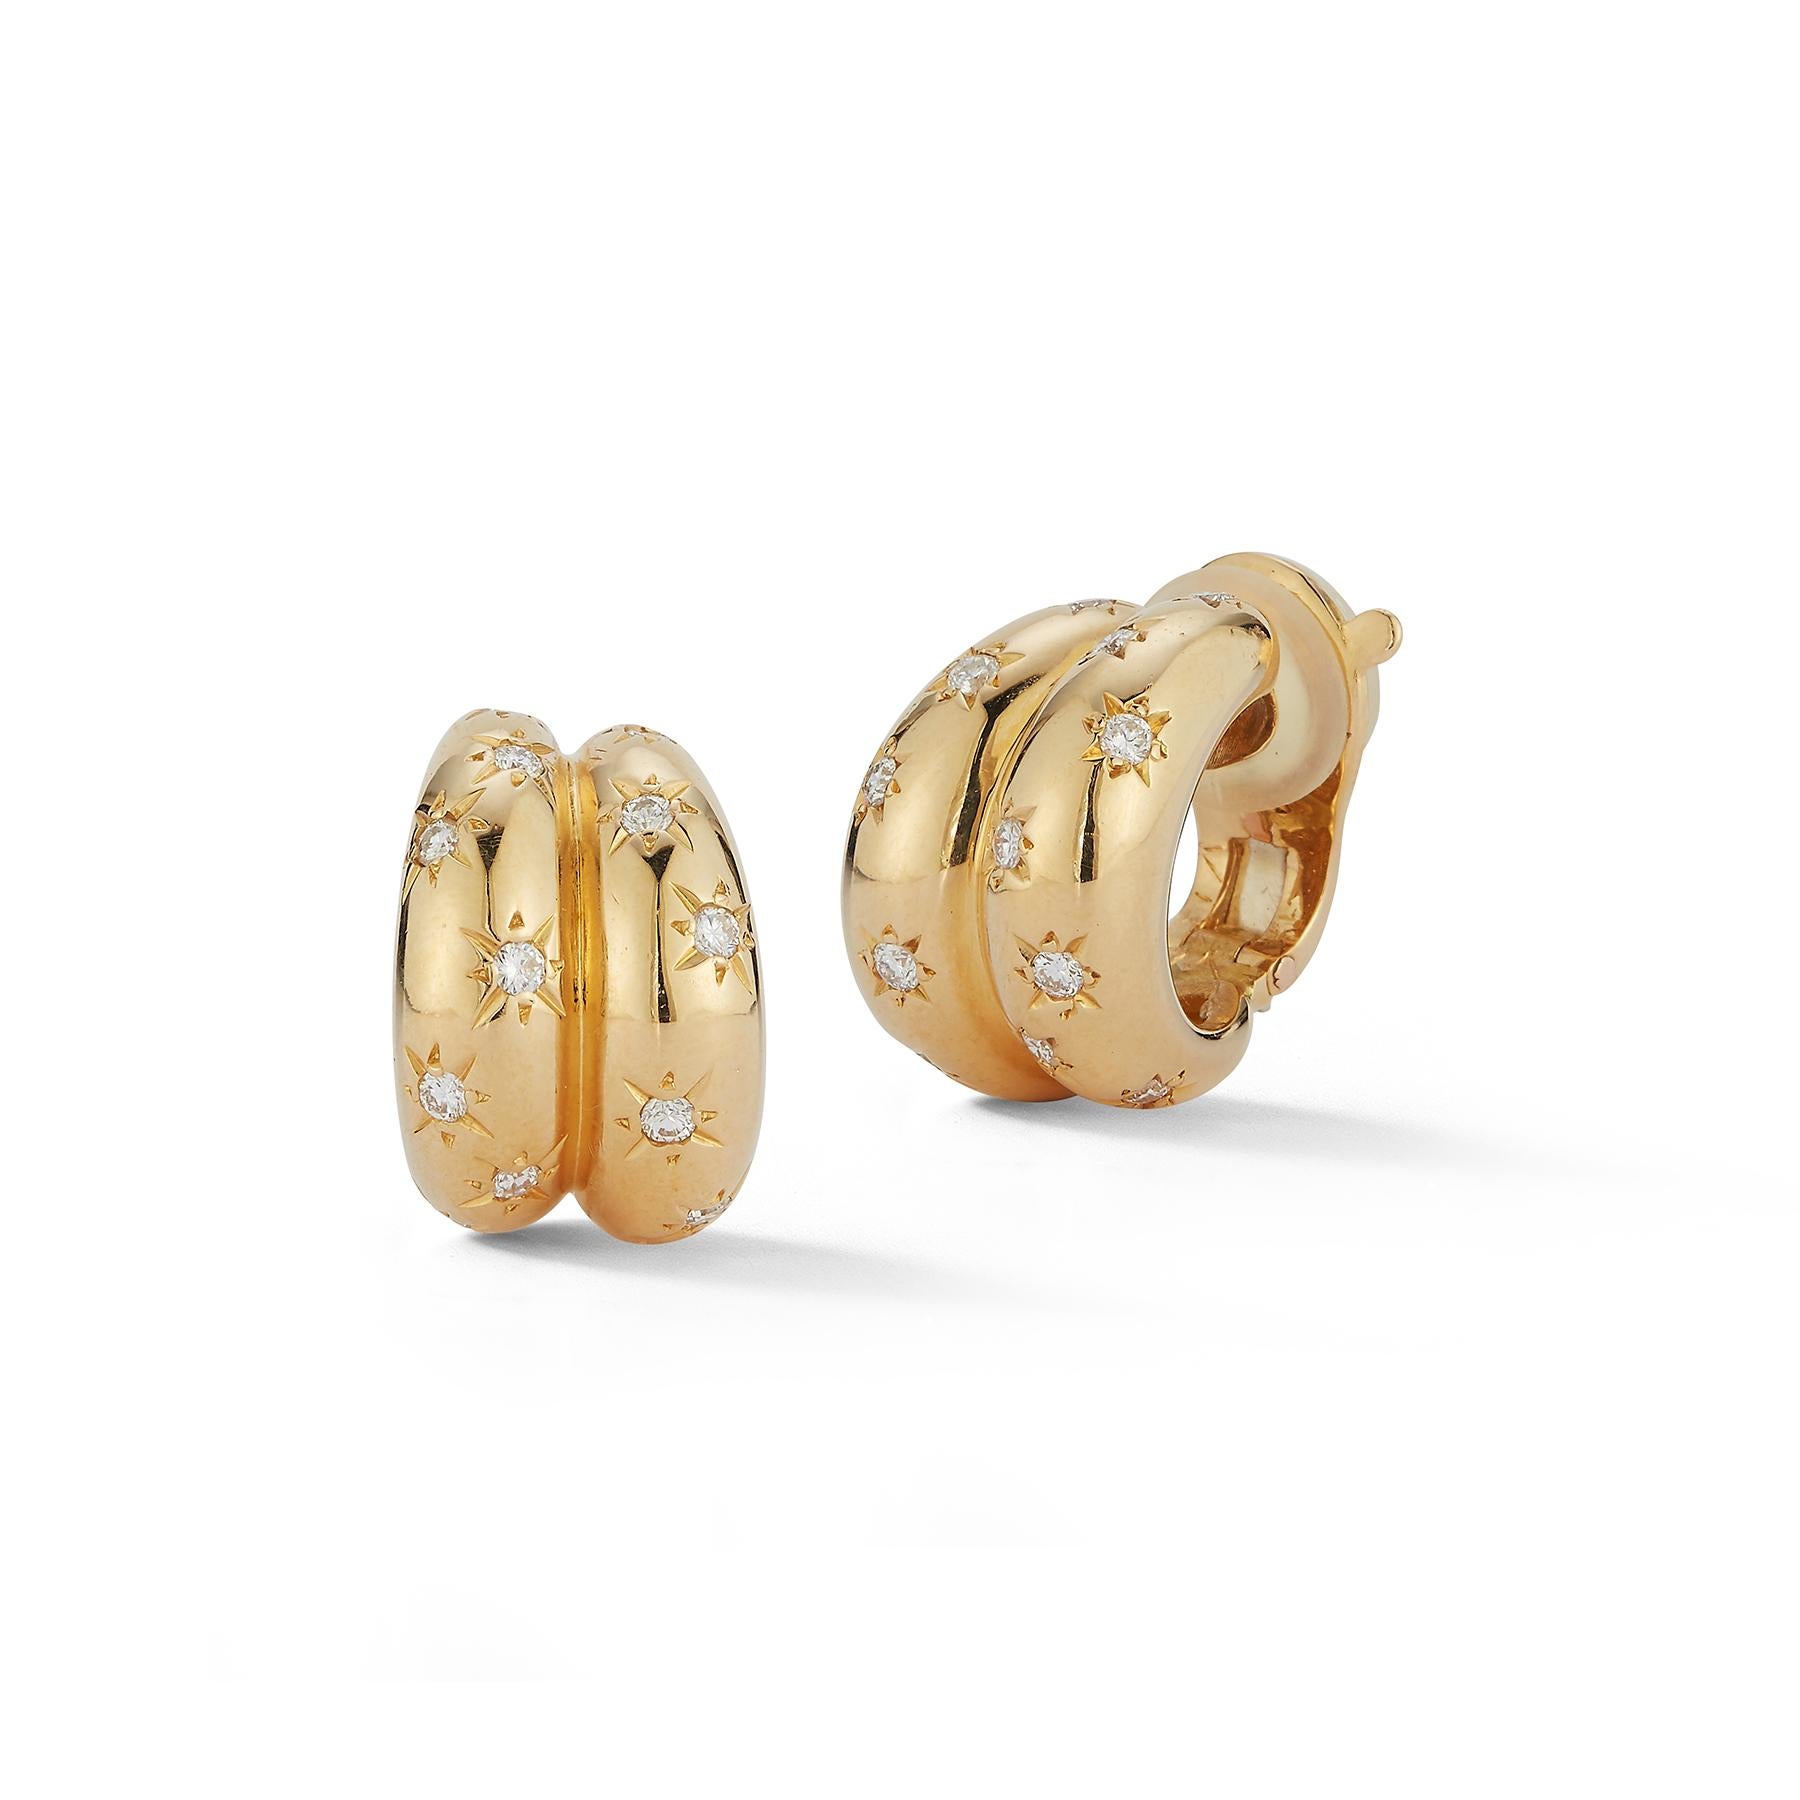 Retro Van Cleef & Arpels Diamond Hoop Earrings

18k Gold featuring an array of diamonds

Clip-On Earrings

Signed VCA and numbered

Made circa 1940
